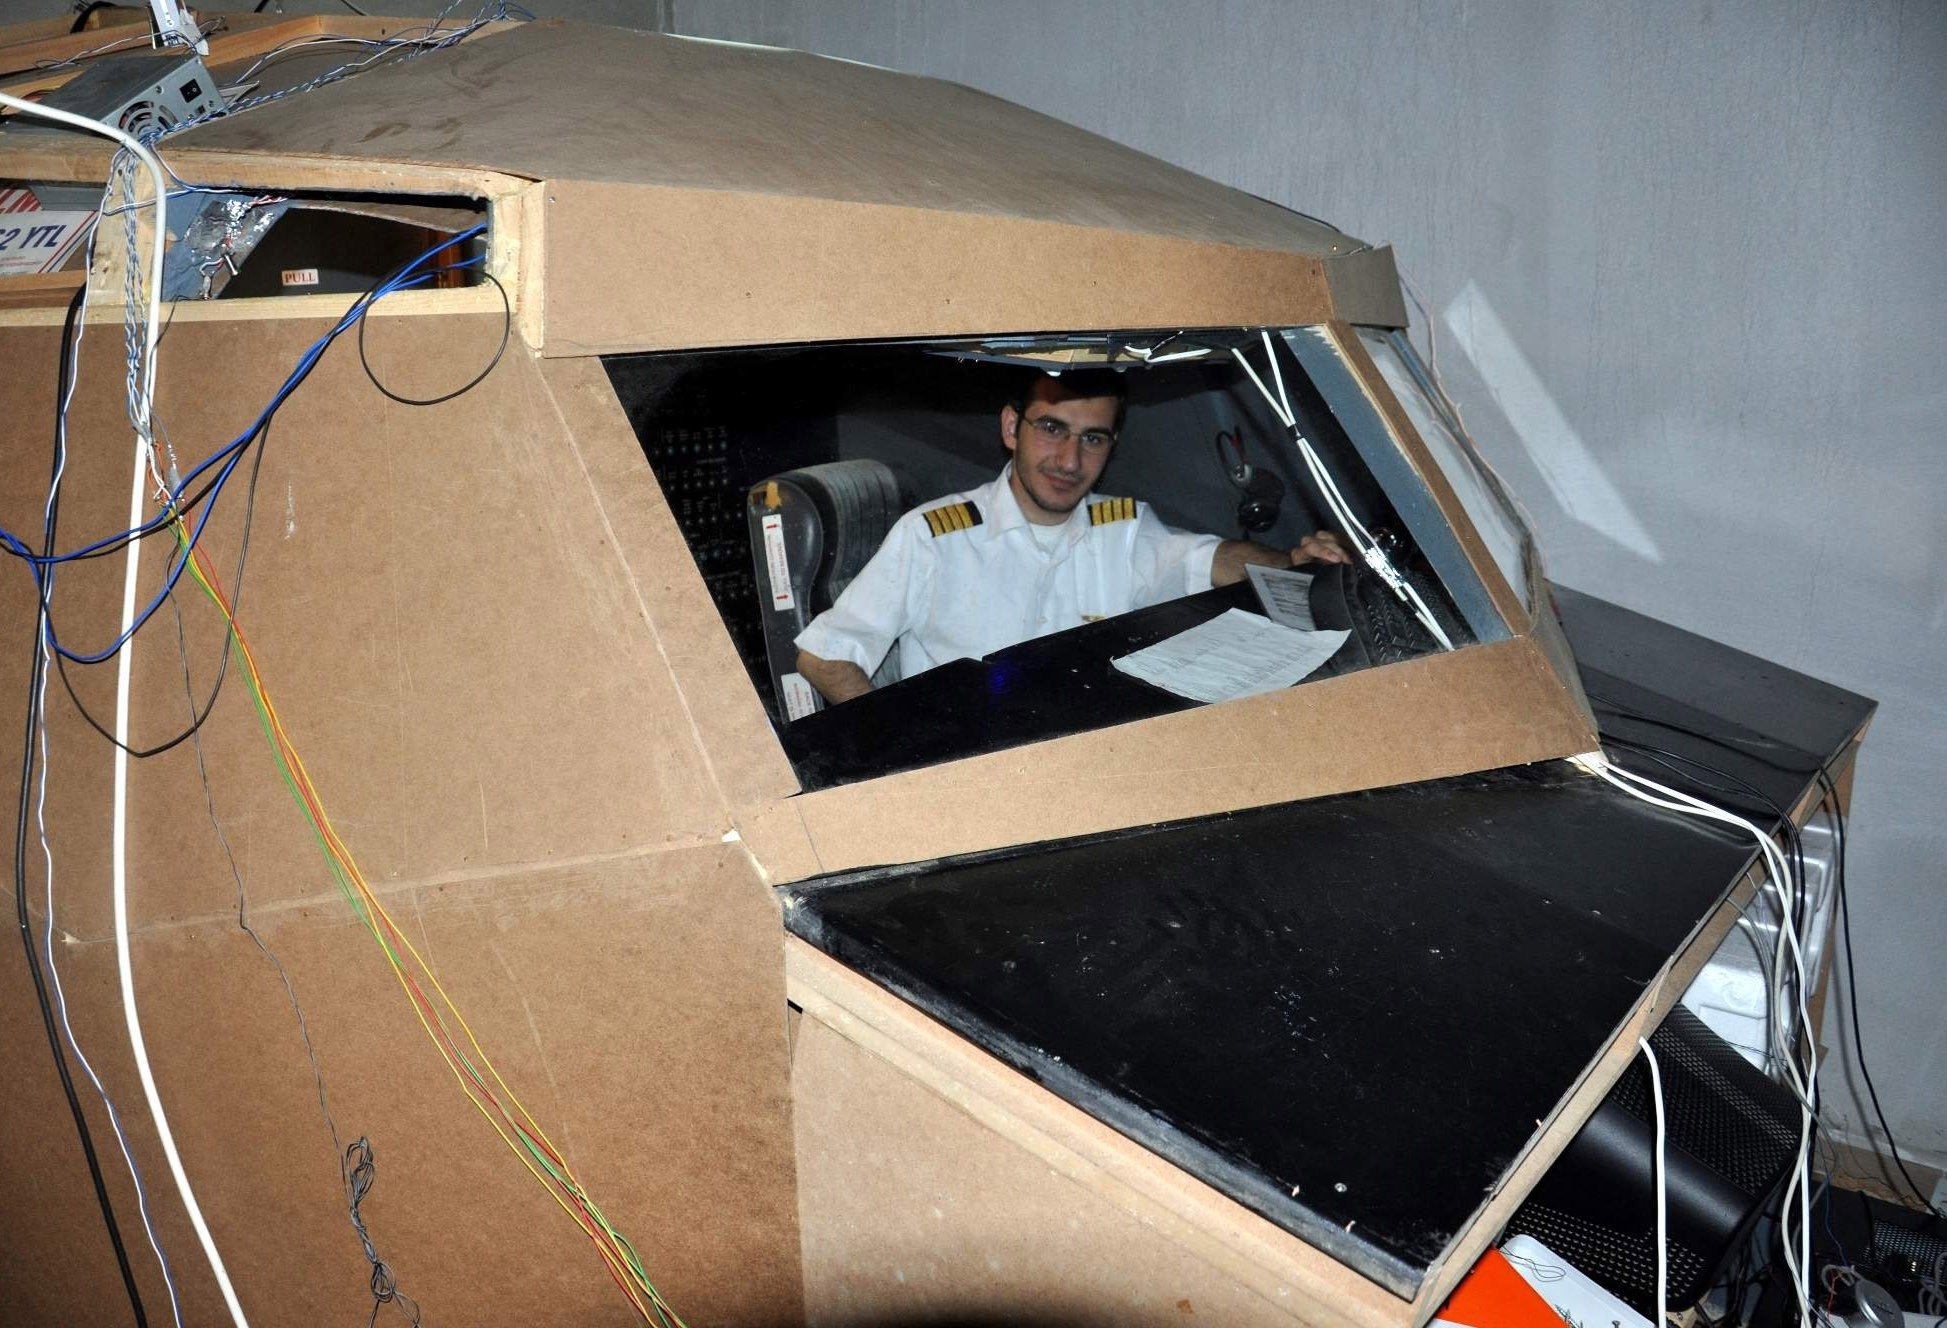 Aviation-lover Alihan Kolaylı seen in front of the Boeing 737-800 airplane cockpit he created in his basement 10 years ago, in Trabzon, Turkey, Nov. 29, 2021. (IHA Photo)